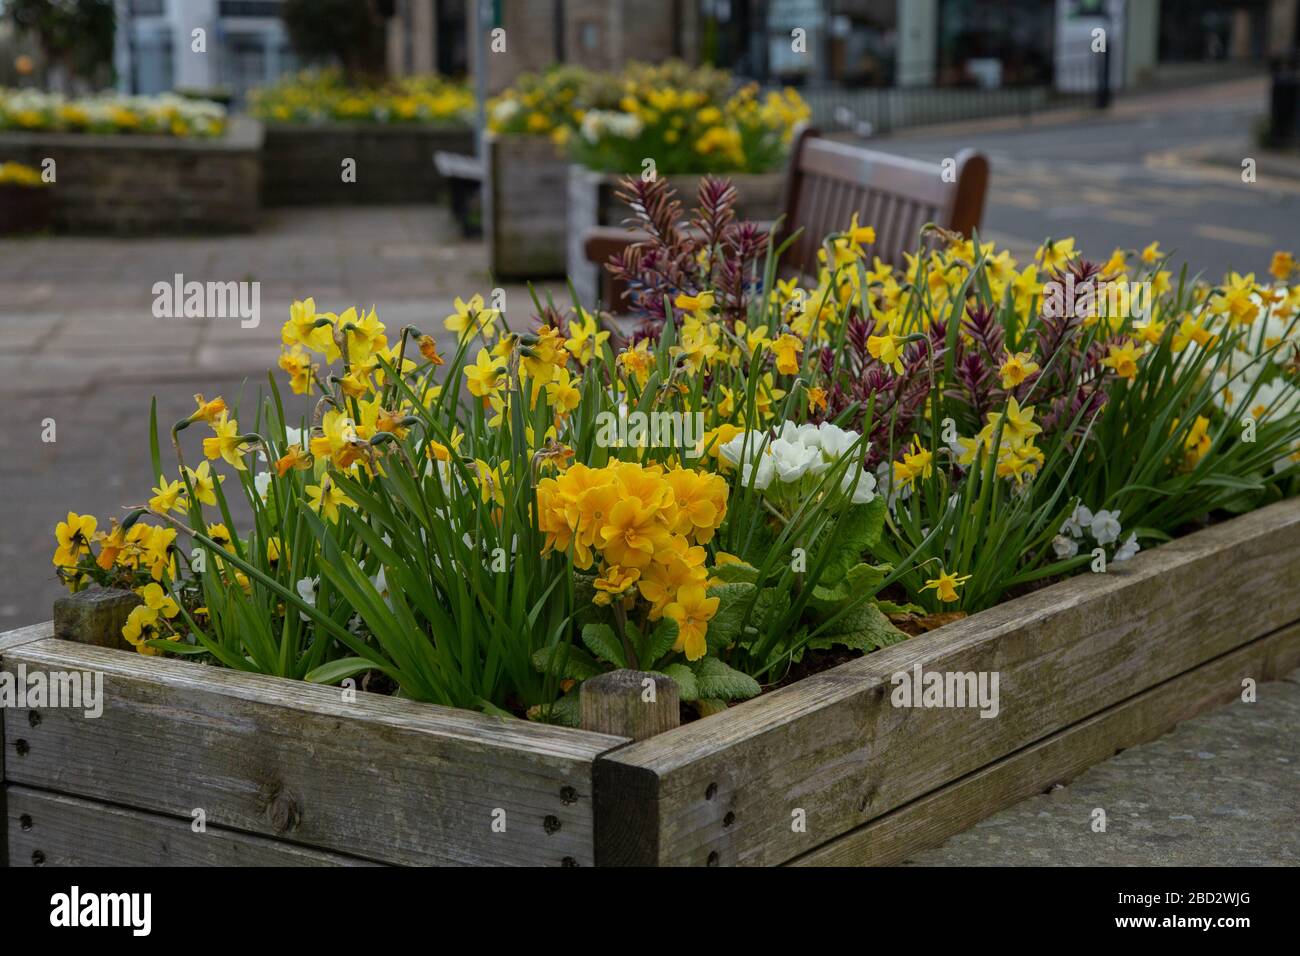 A raised flower bed full of spring flowers in bloom in Baildon, Yorkshire, England. Stock Photo